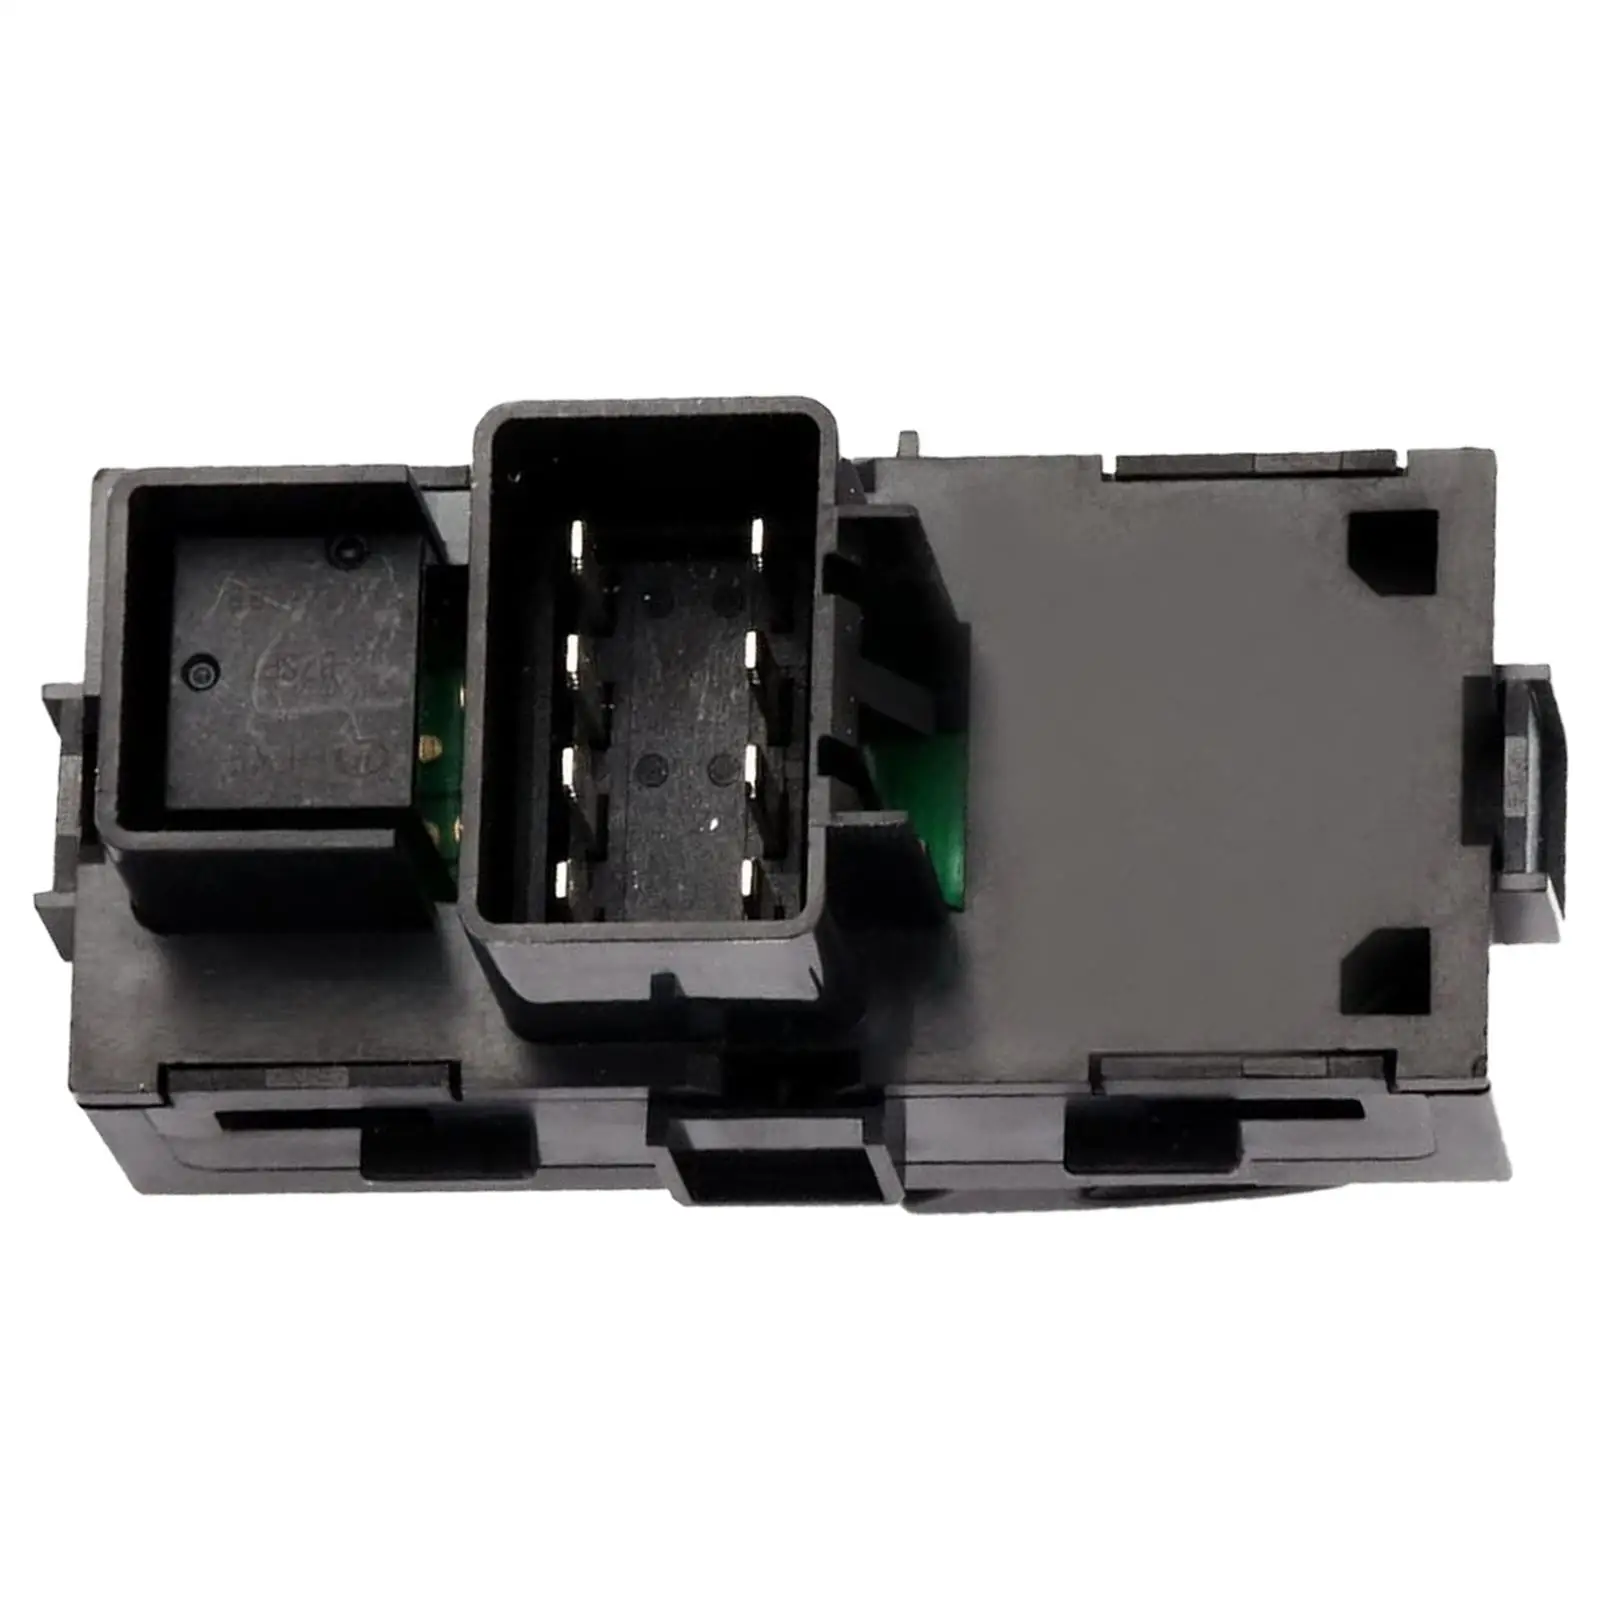 Power Window Switch ,for  12-2013, Rear Driver Passenger Side, Fit for  Rh LH ,Automotive Parts  Interior Switches